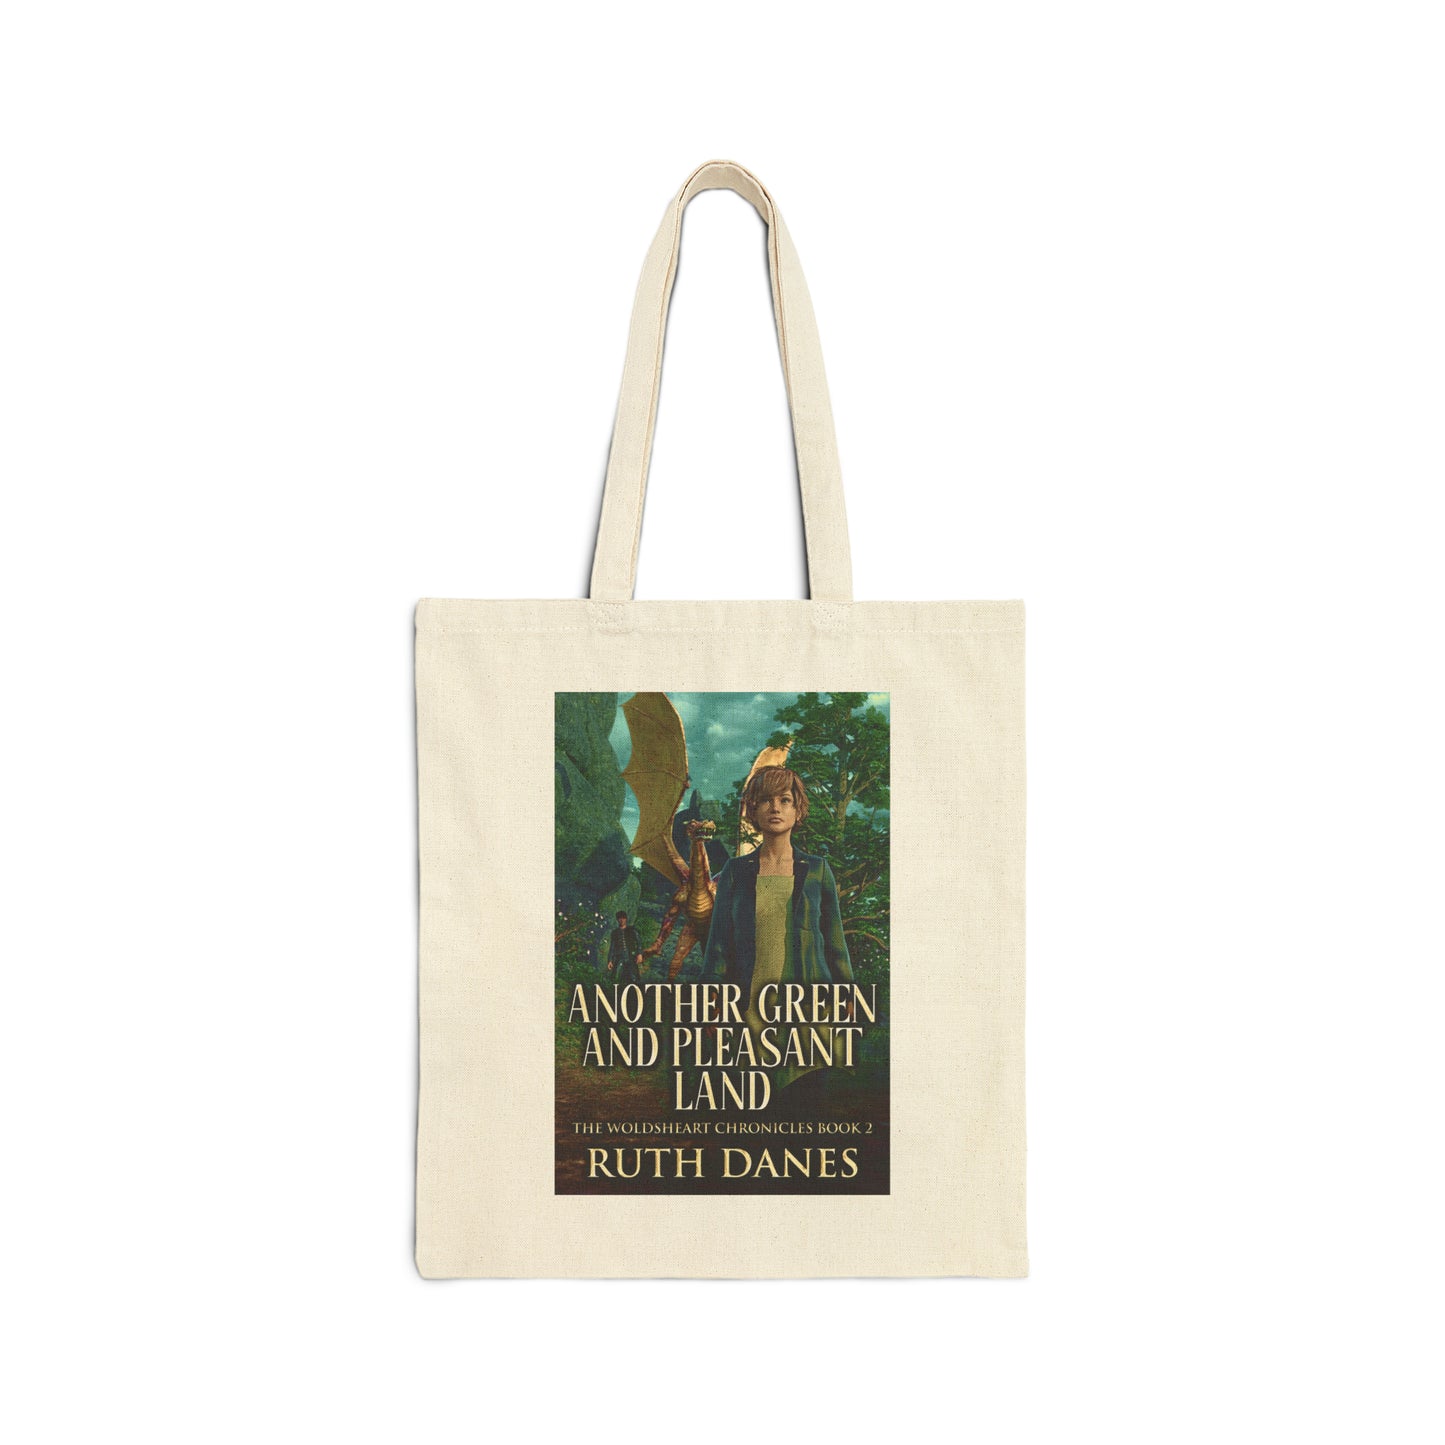 Another Green and Pleasant Land - Cotton Canvas Tote Bag